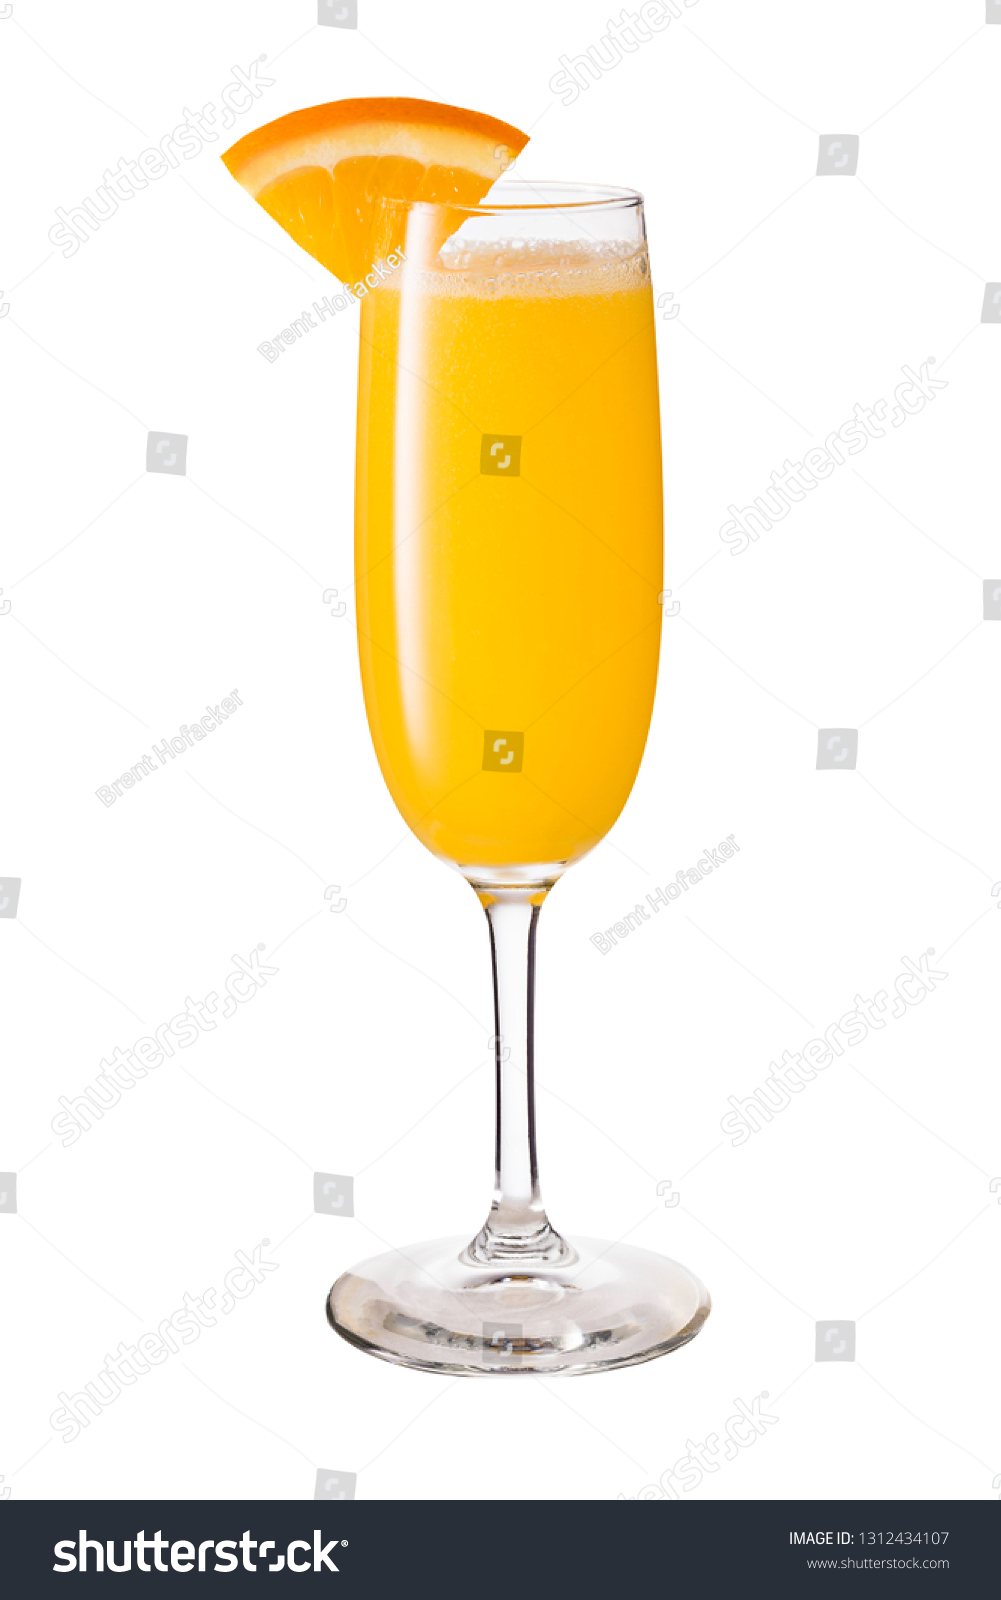 Vodka Orange Juice Mimosa Cocktail on White with a Clipping Path #1312434107